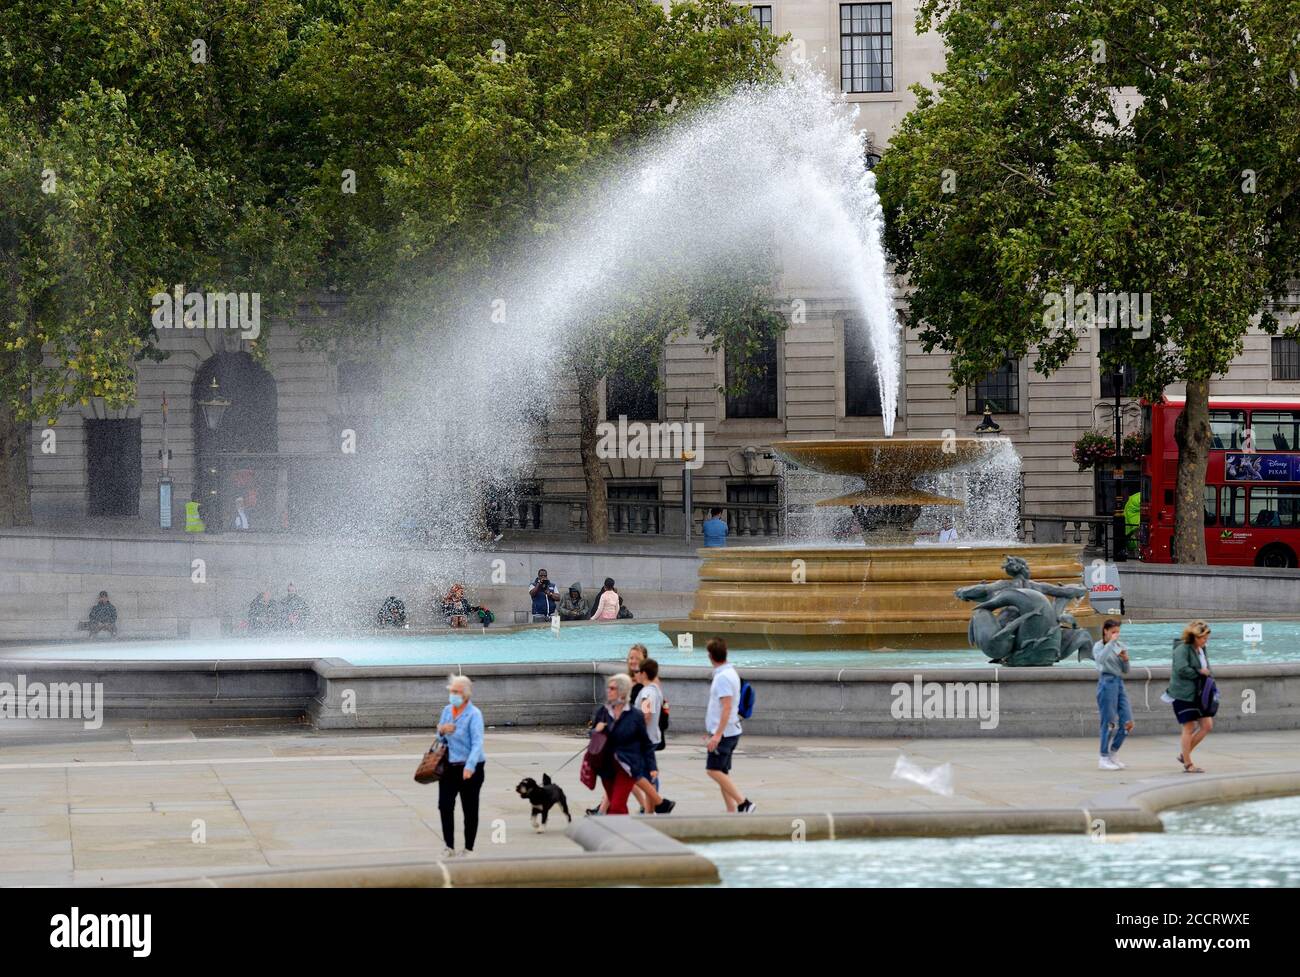 London, England, UK. Trafalgar Square - the water of one of the fountains blown across the square by strong gusting winds, August 2020 Stock Photo